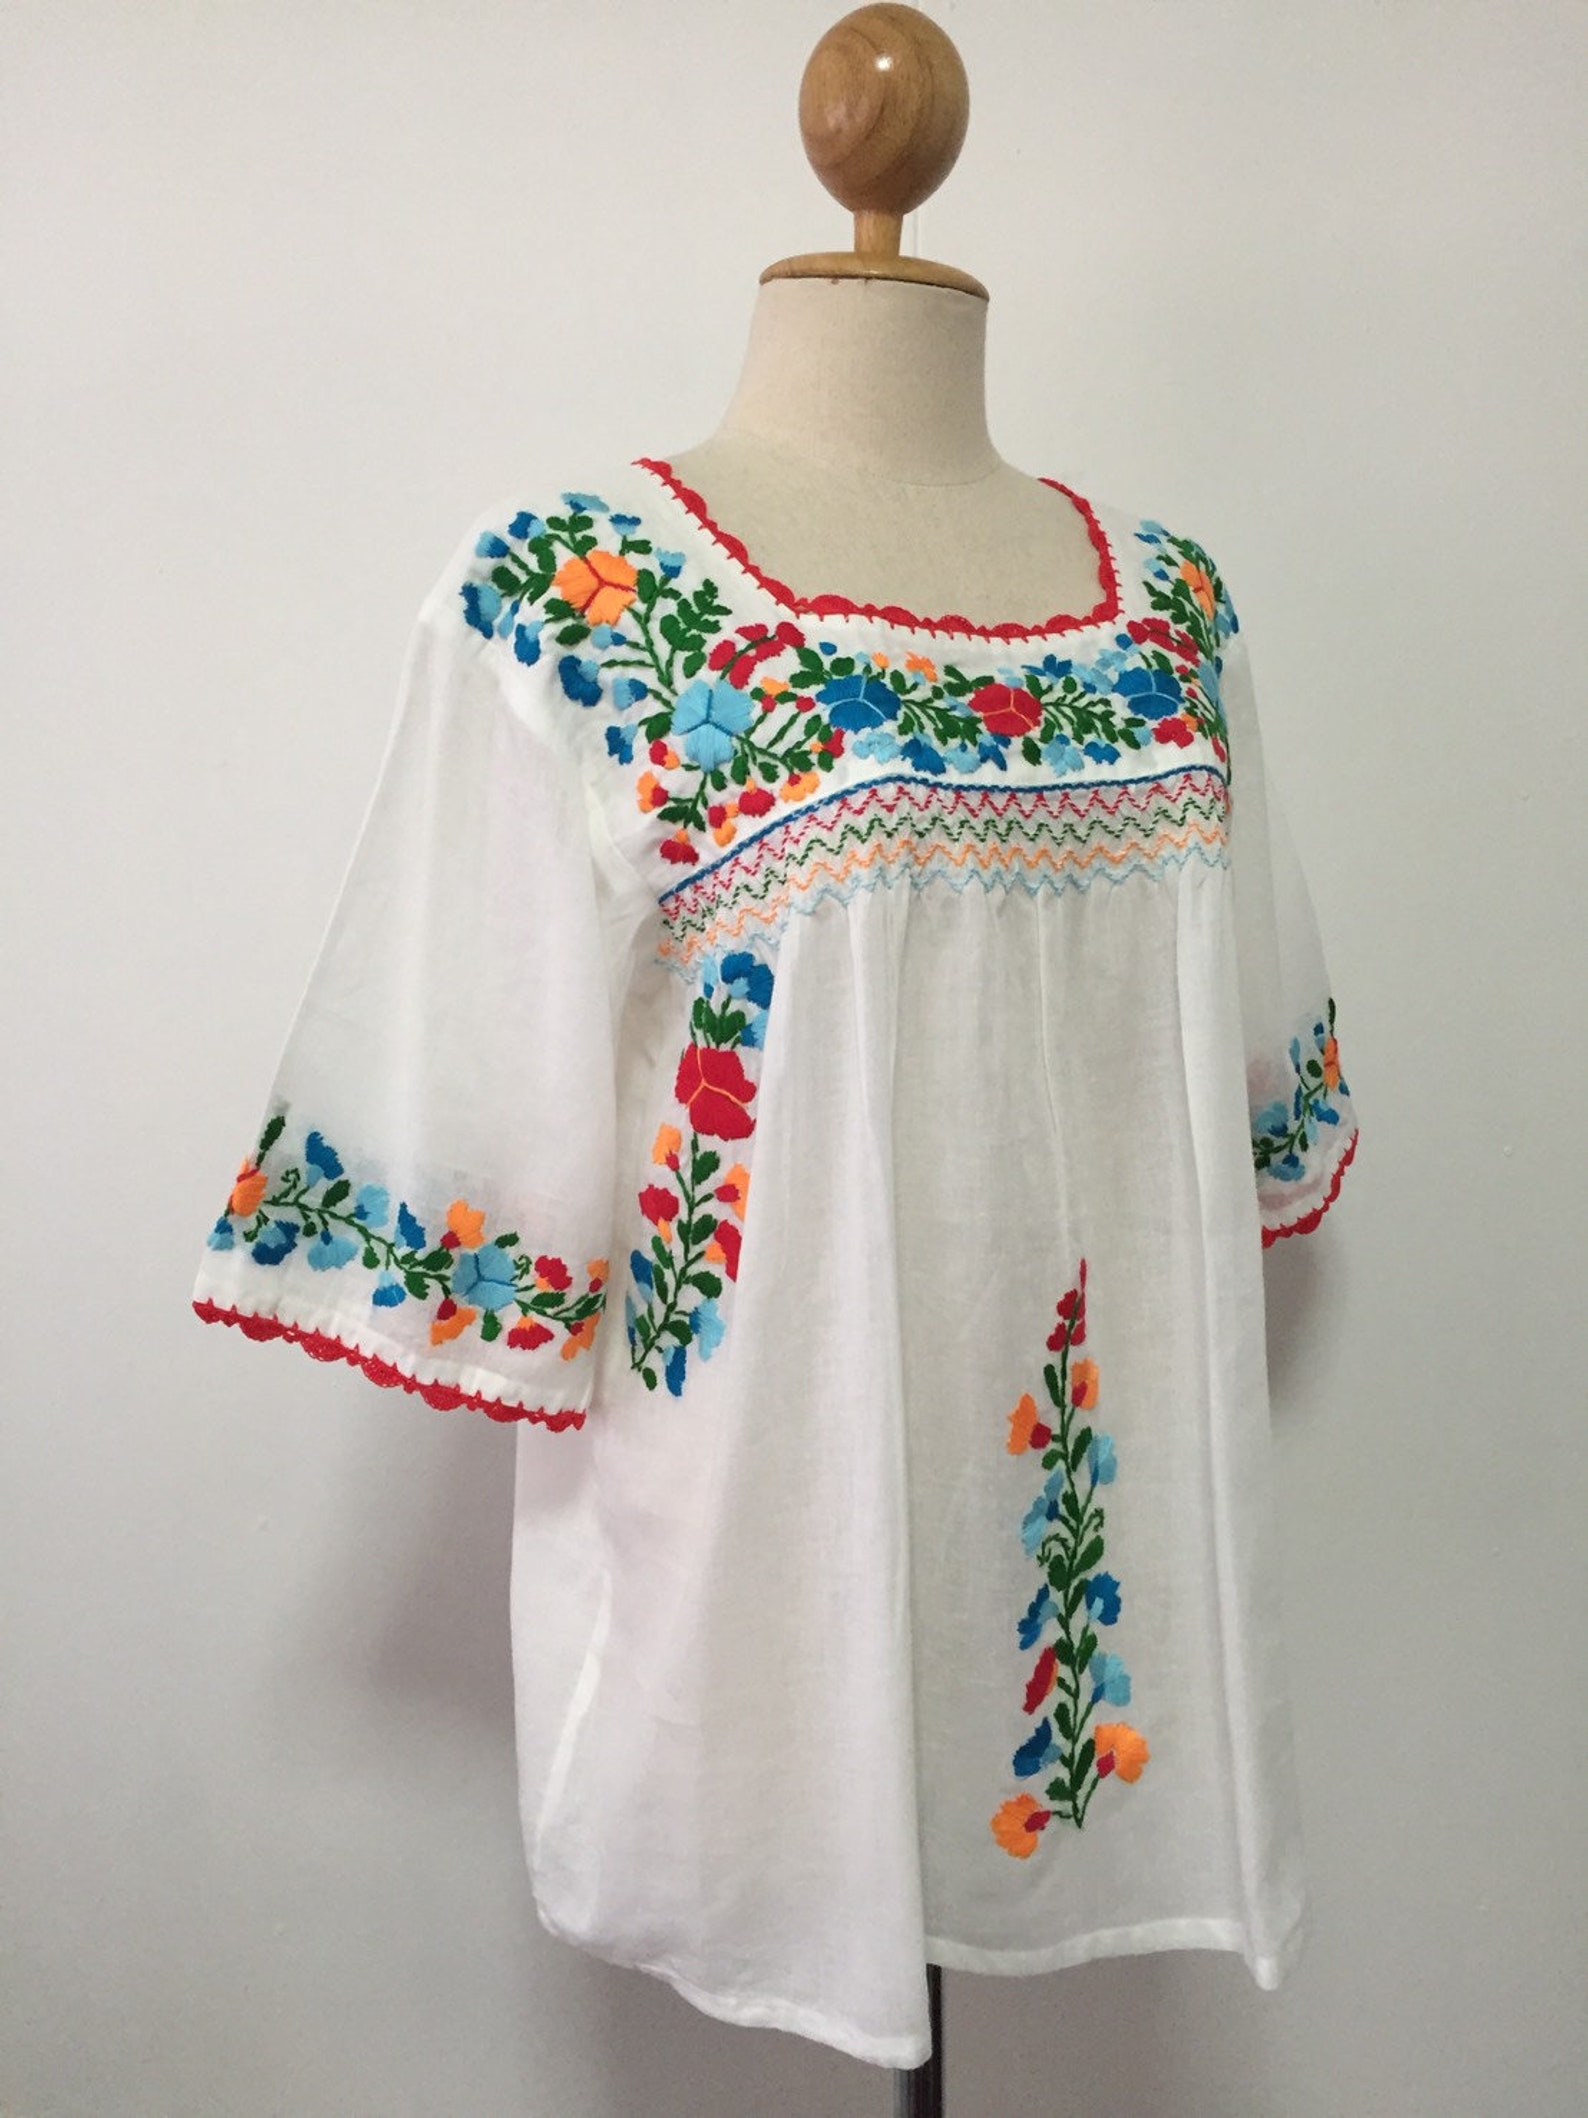 Embroidered Mexican Blouse White Cotton Top Boho Blouse Hippie | Etsy